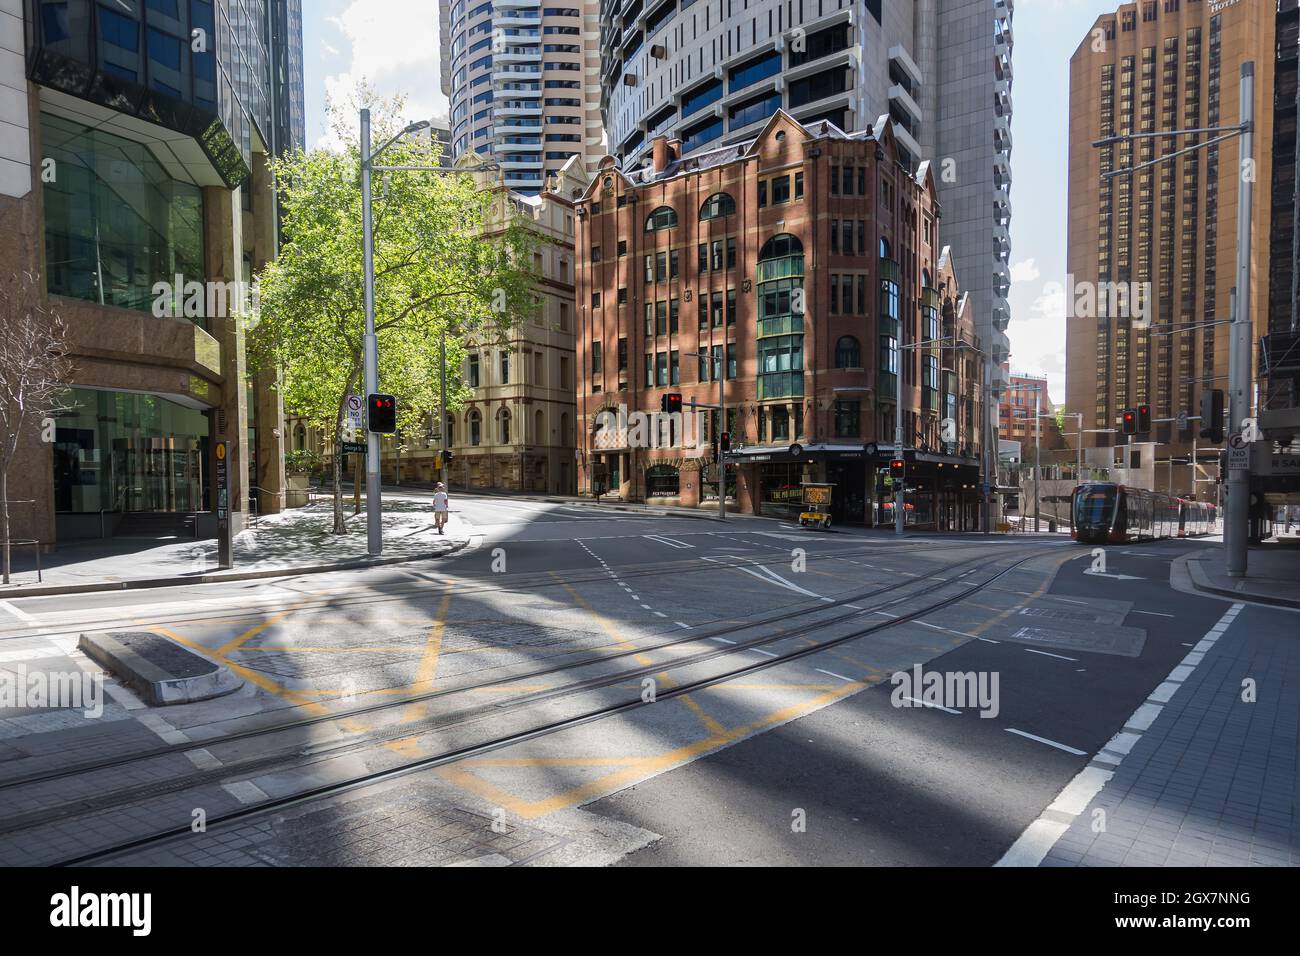 Sydney, Australia. Monday, 4th October 2021. The Sydney central business district is still very quiet as Sydney prepares to reopen once the 70% full vaccination target is reached by Monday 11th October. General views George Street. Credit: Paul Lovelace/Alamy Live News Stock Photo